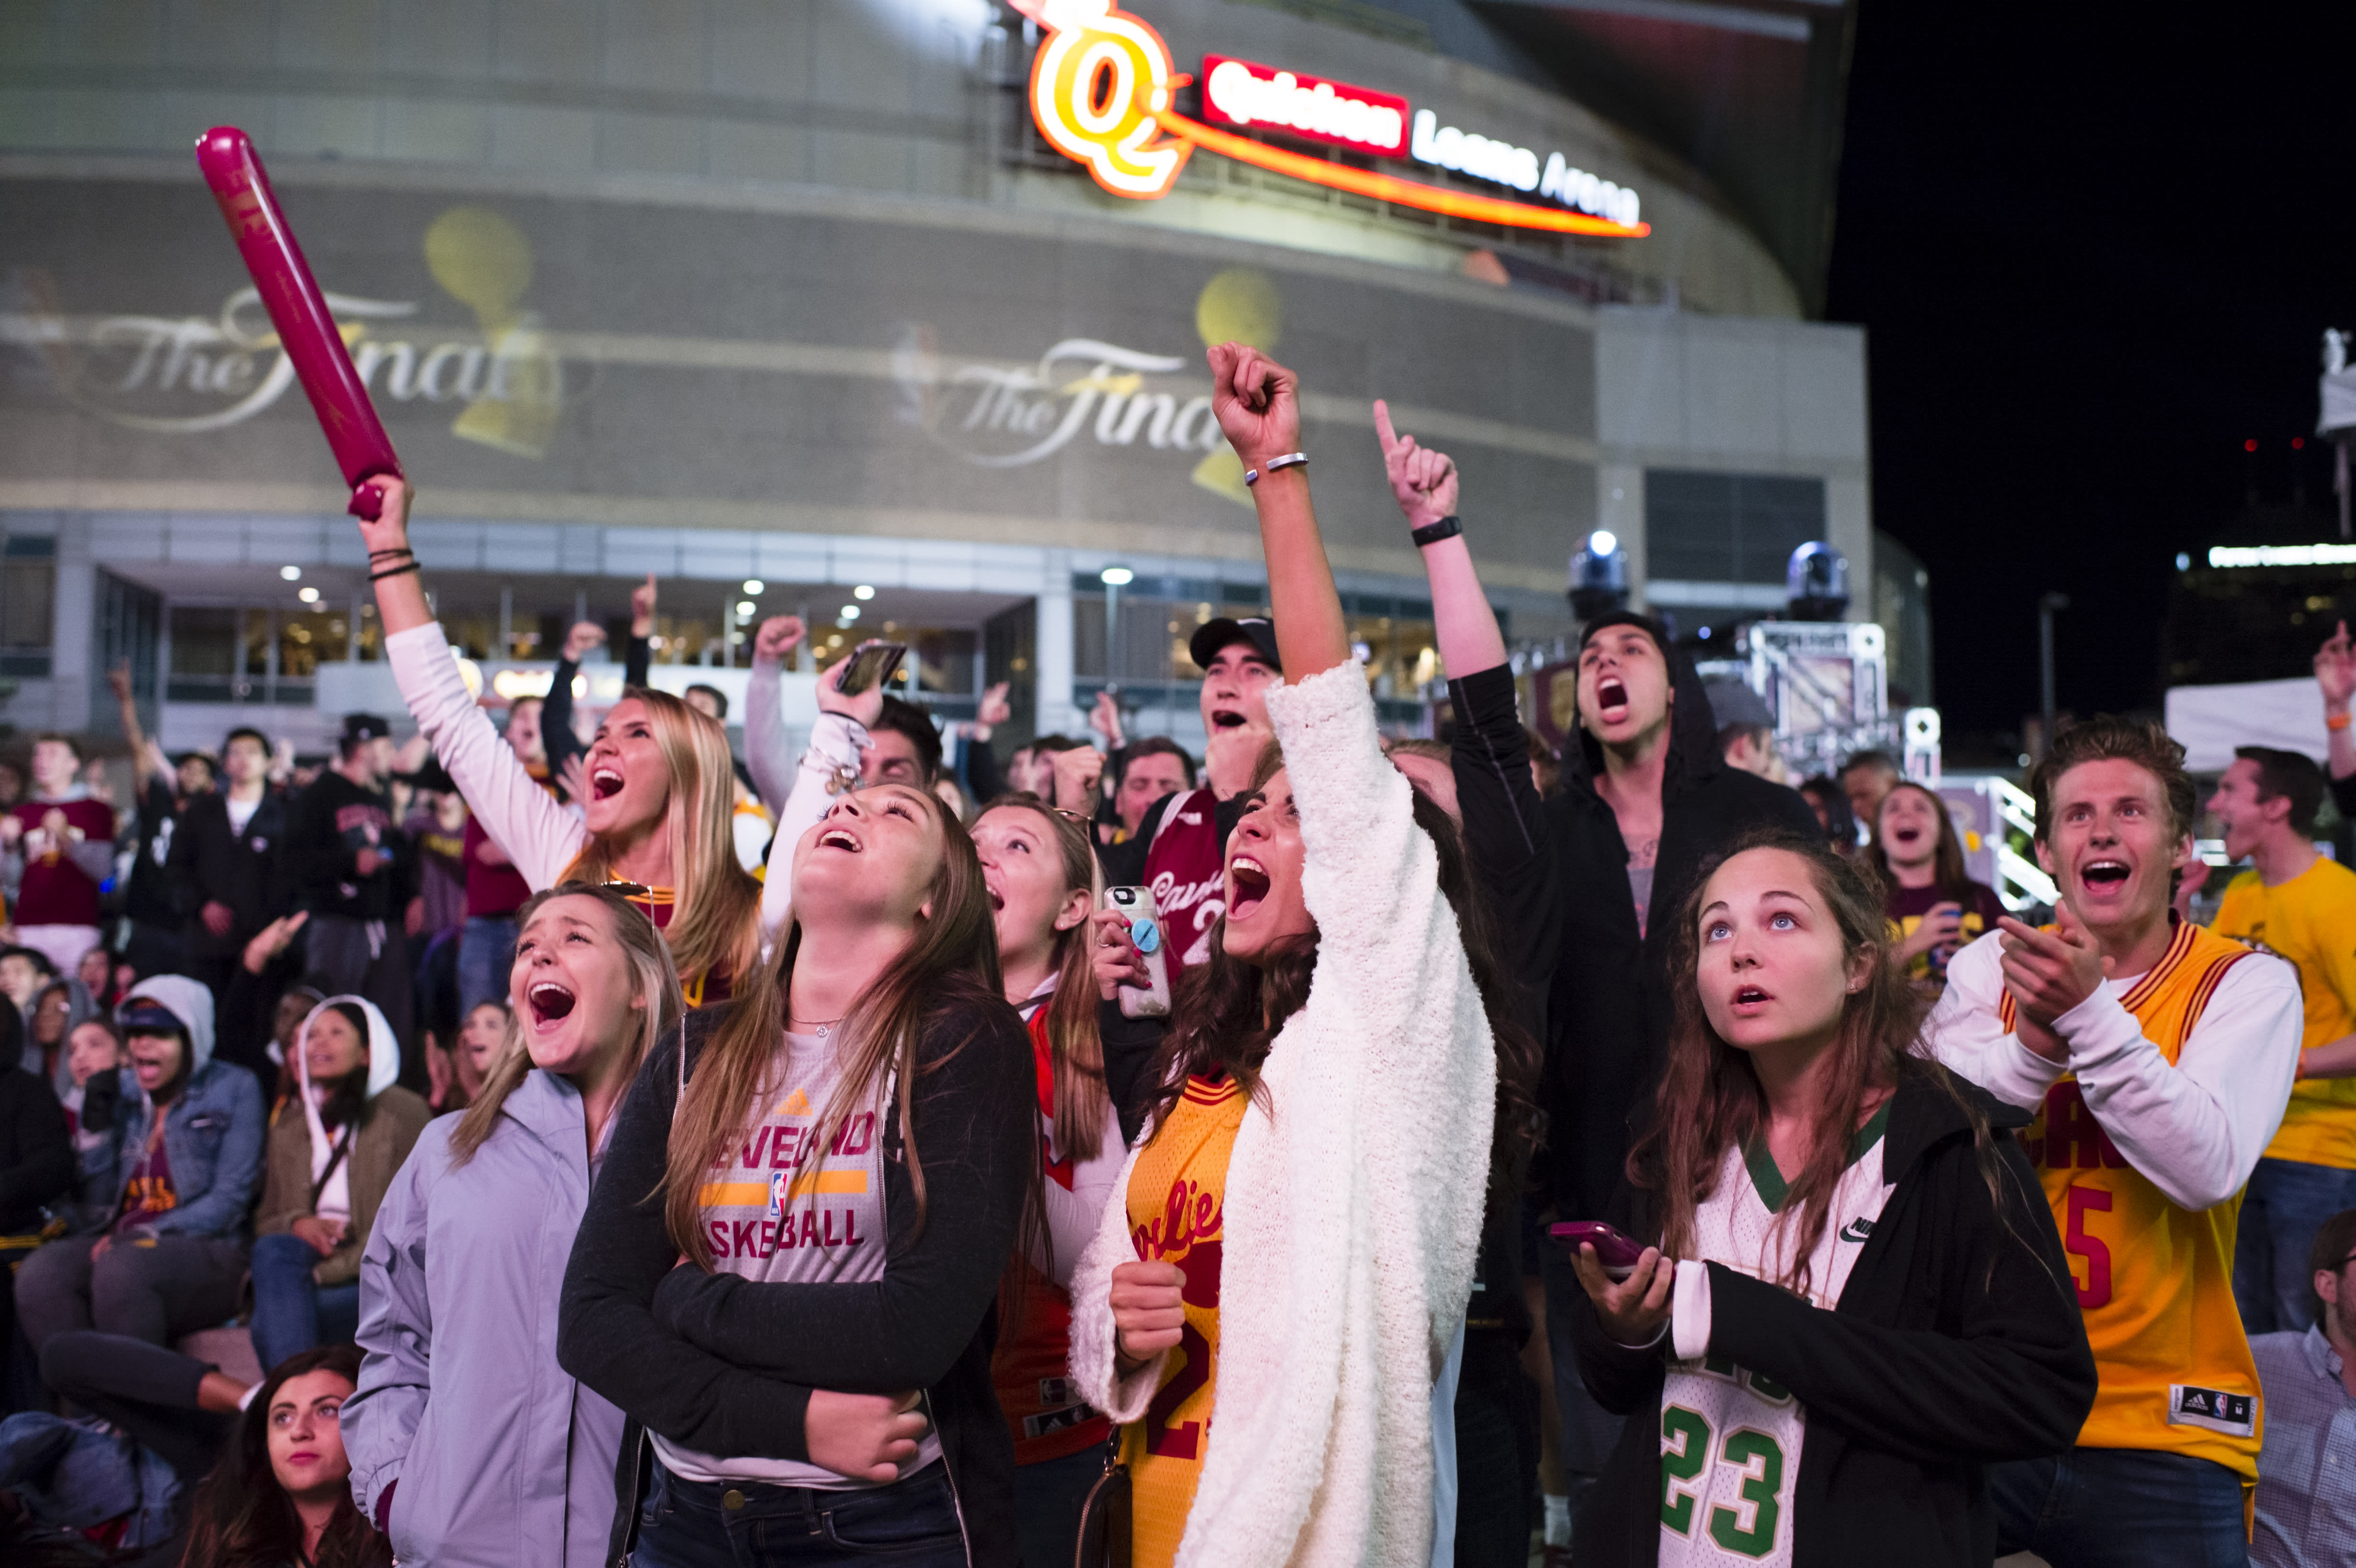 Somehow, These Cavs Fans Still Think the Team Has a Shot in the NBA